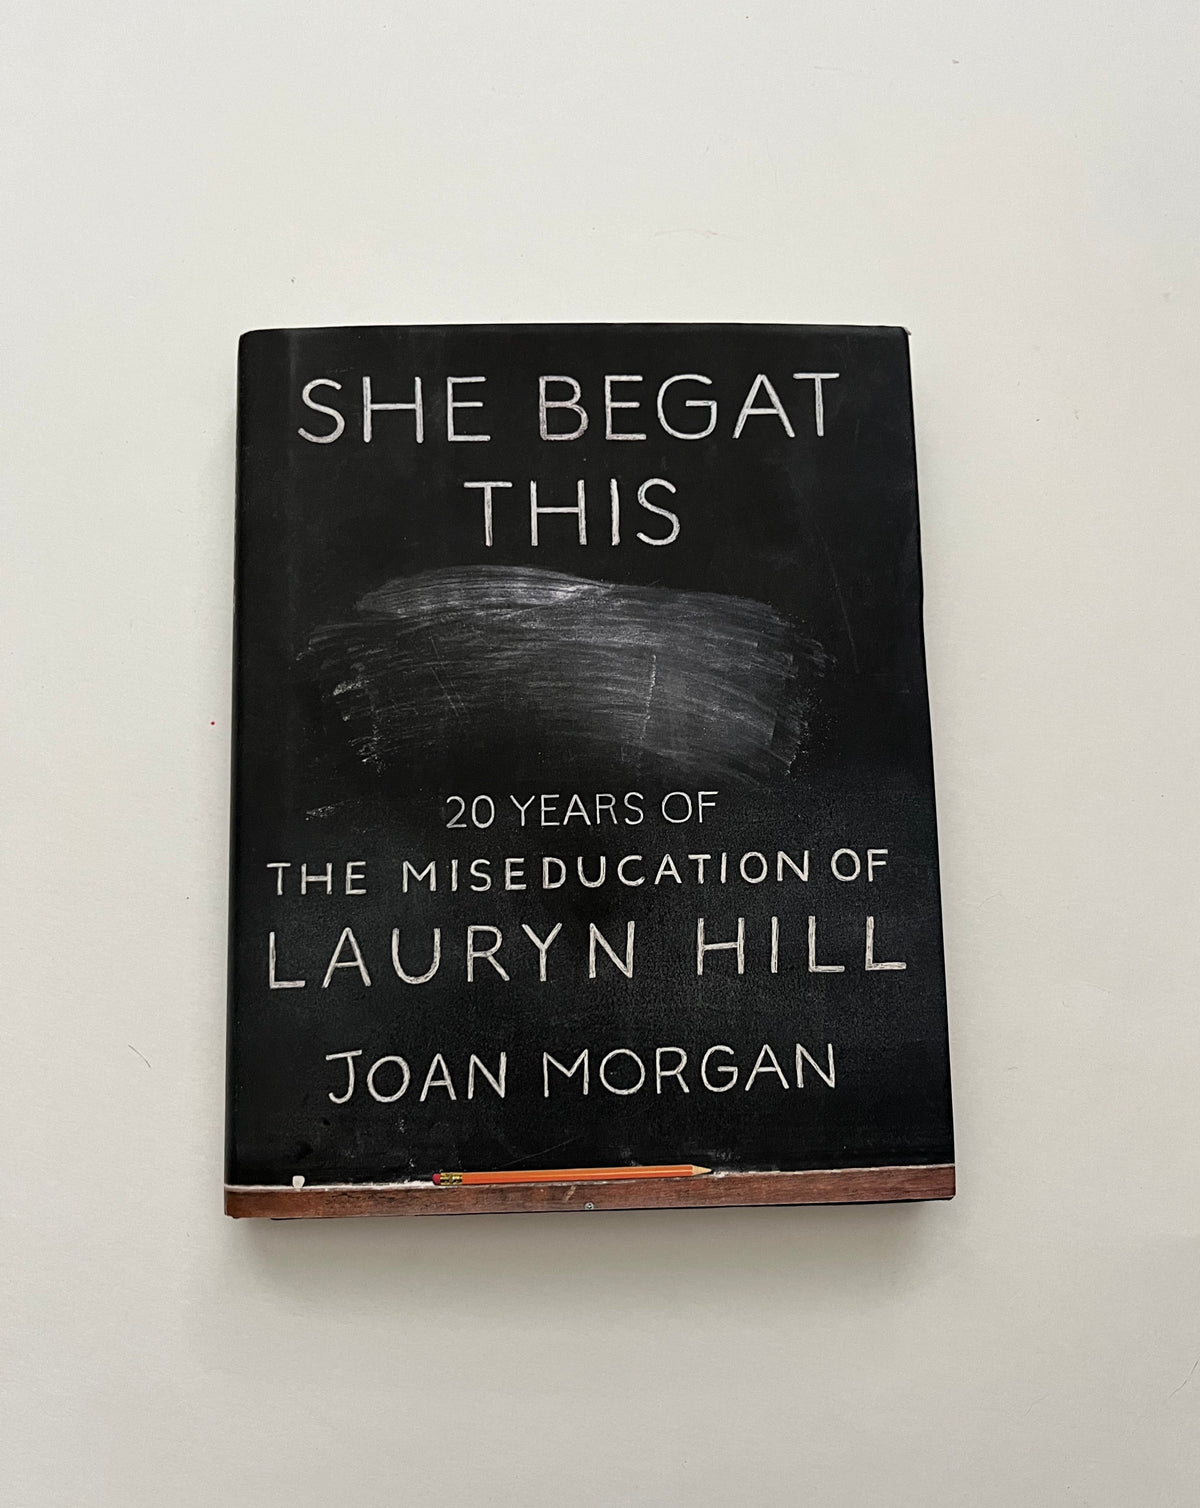 She Begat This: 20 Years of The Miseducation of Lauryn Hill by Joan Morgan